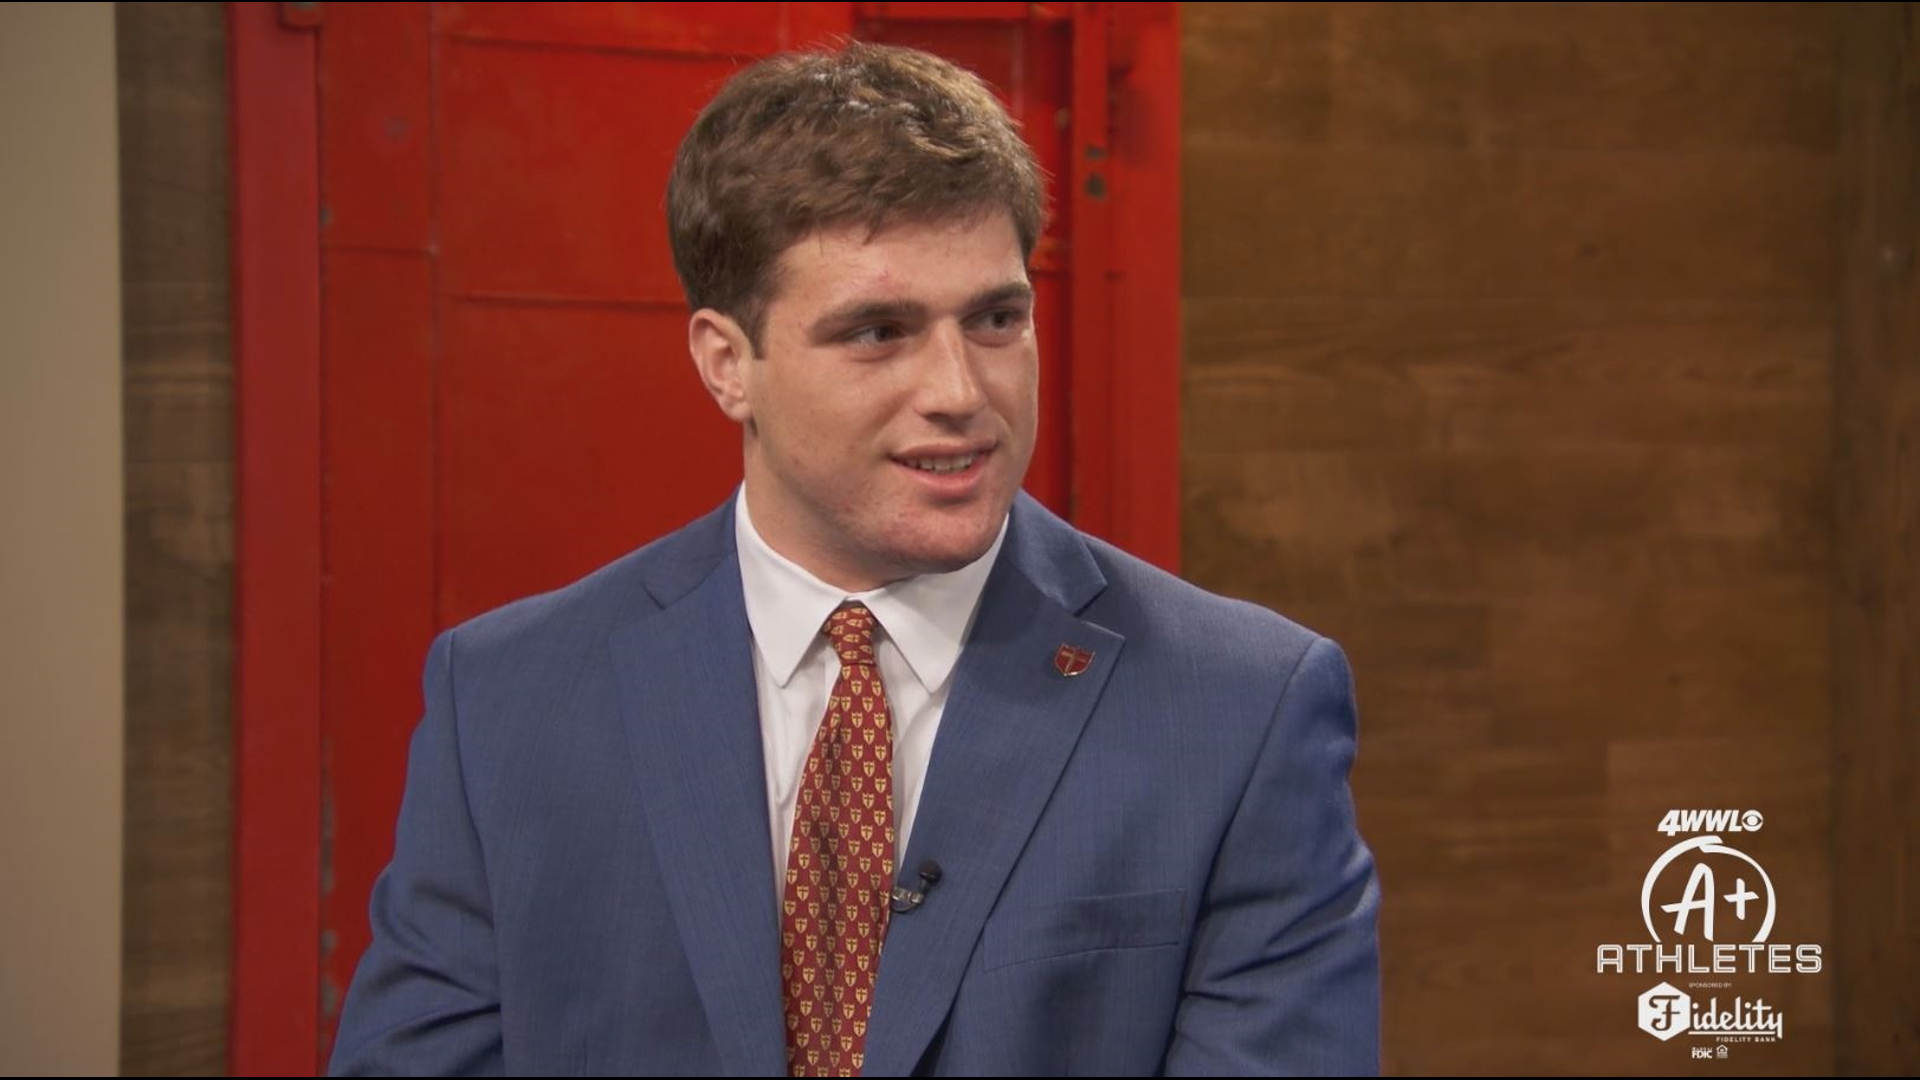 WWL-TV is honoring athletes who excel on and off the field, like Brother Martin's Nick Malek.